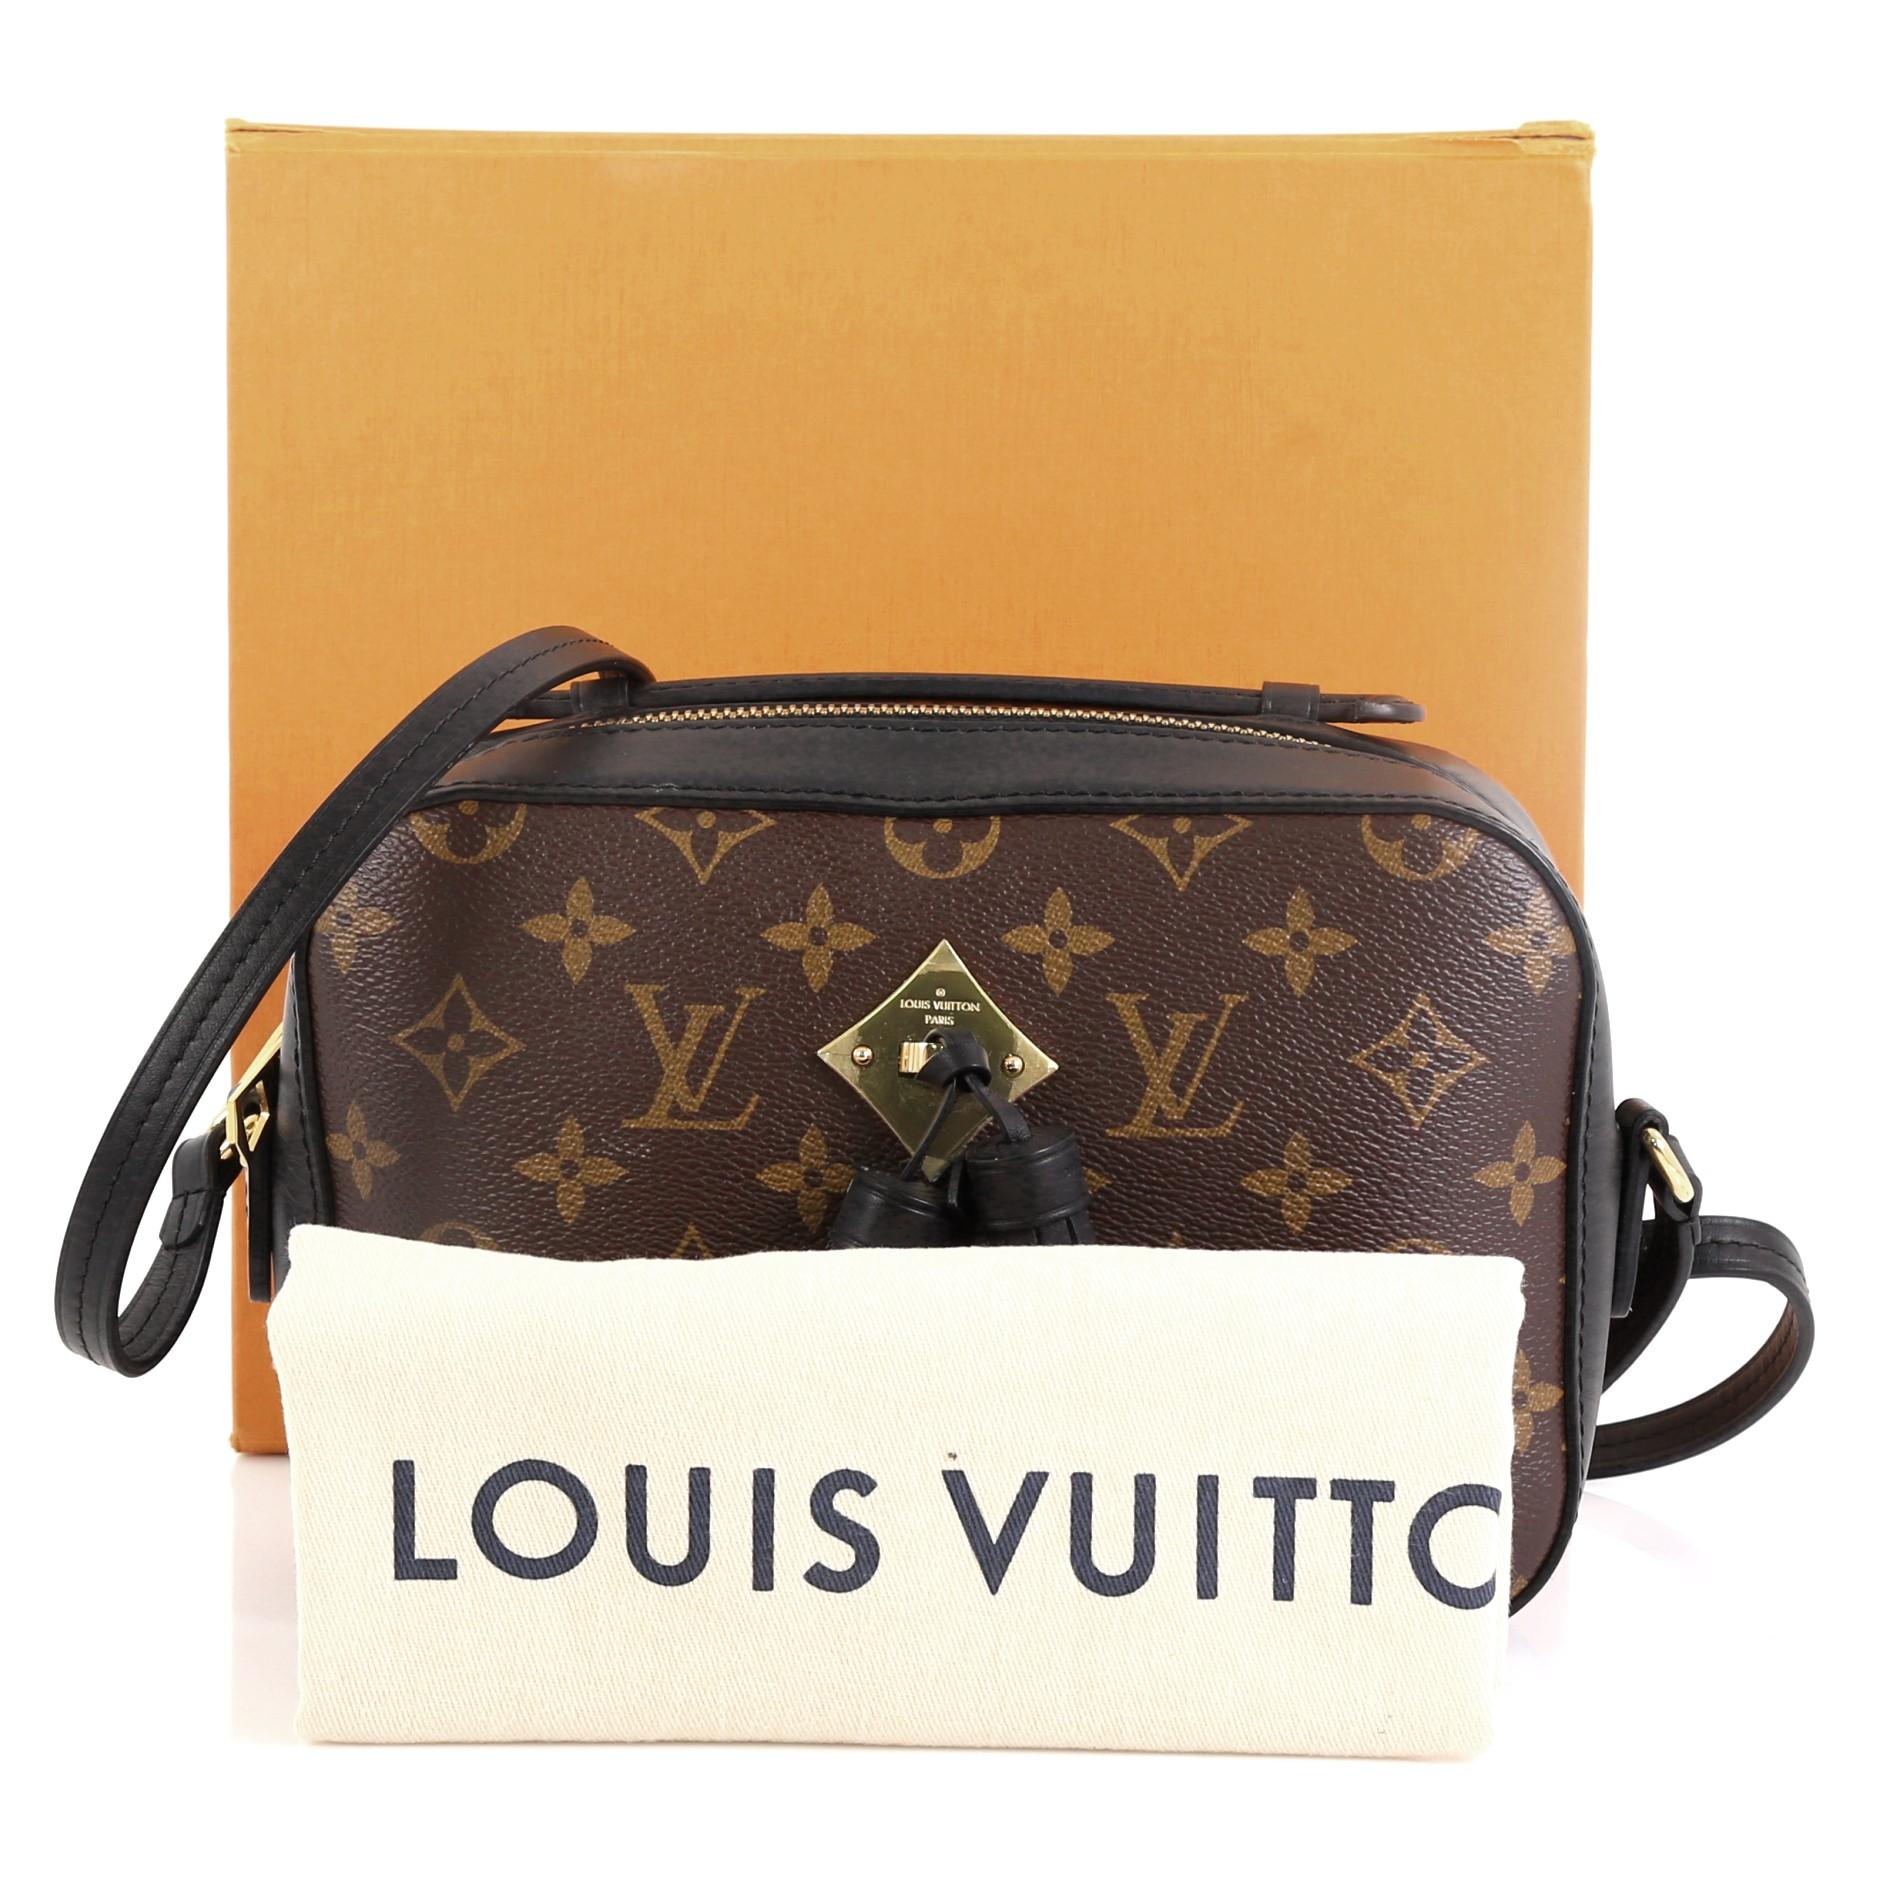 This Louis Vuitton Saintonge Handbag Monogram Canvas with Leather, crafted from brown monogram coated canvas with leather, features top handle and long strap, leather tassels and gold-tone hardware. Its zip closure opens to a black fabric interior